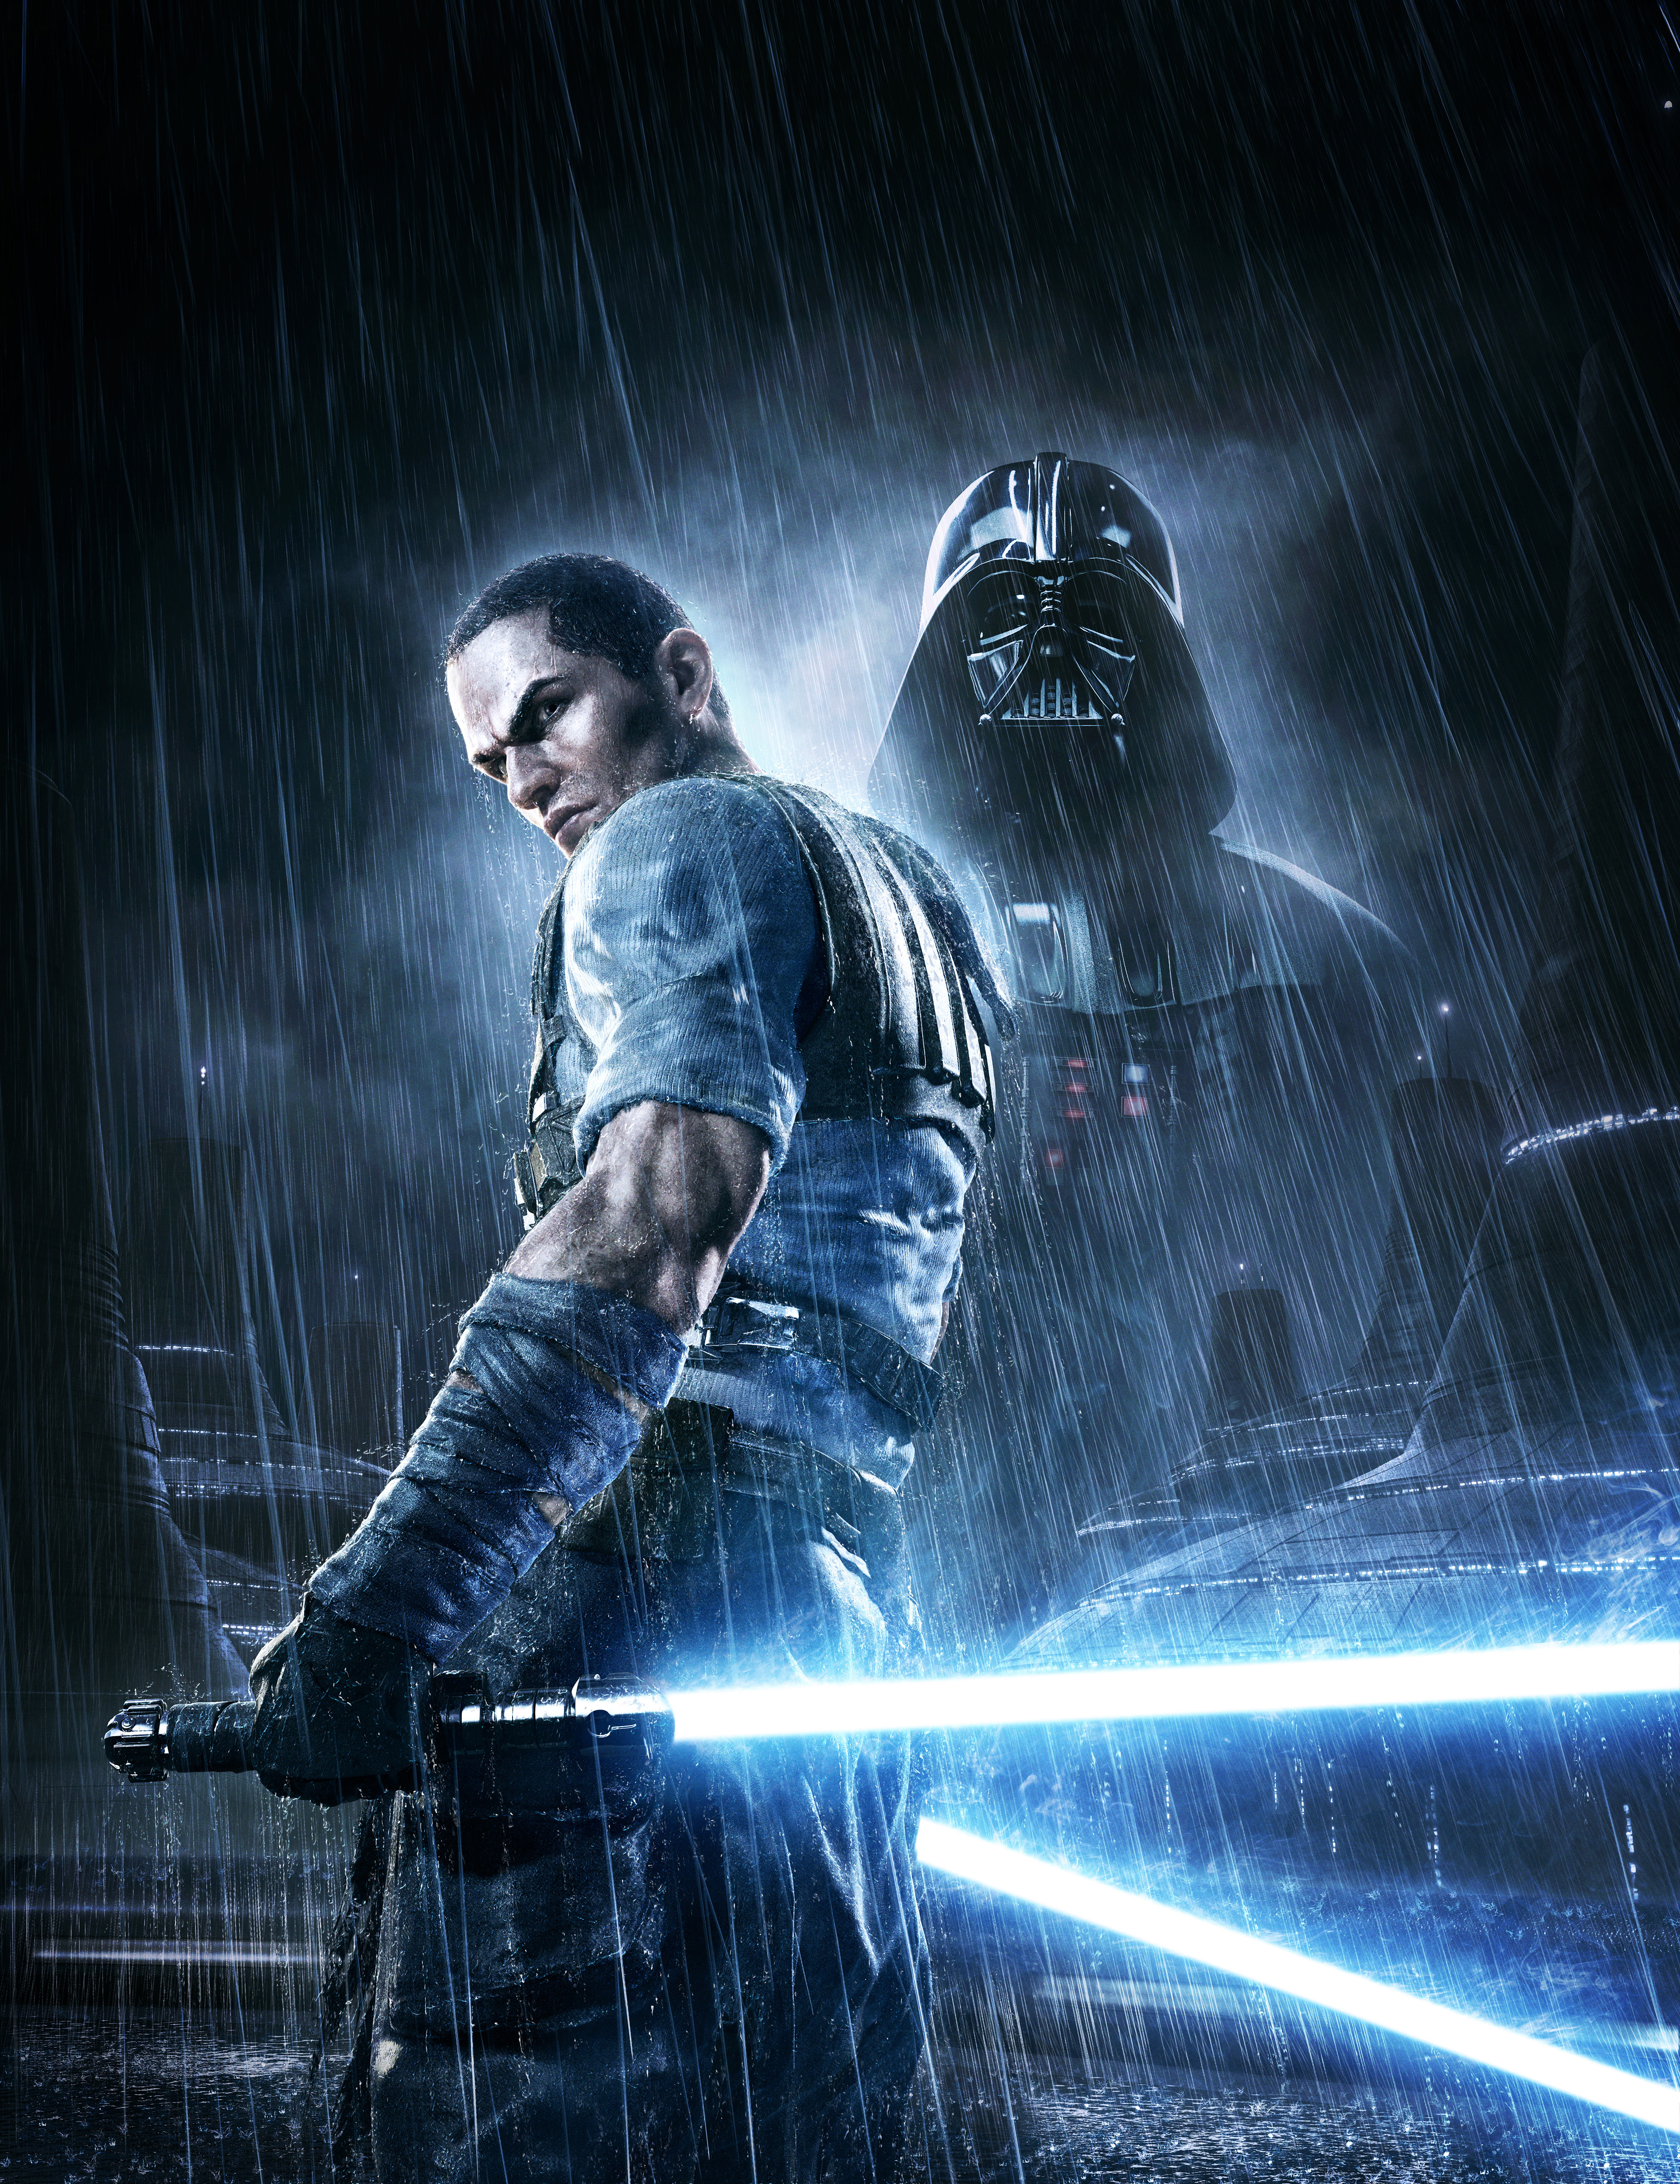 Игра star wars the force unleashed. Стар ВАРС the Force unleashed 2. Star Wars the Force unleashed 2 Старкиллер. Star Wars the Force unleashed 2 Постер. Star Wars unleashed 2 Старкиллер.